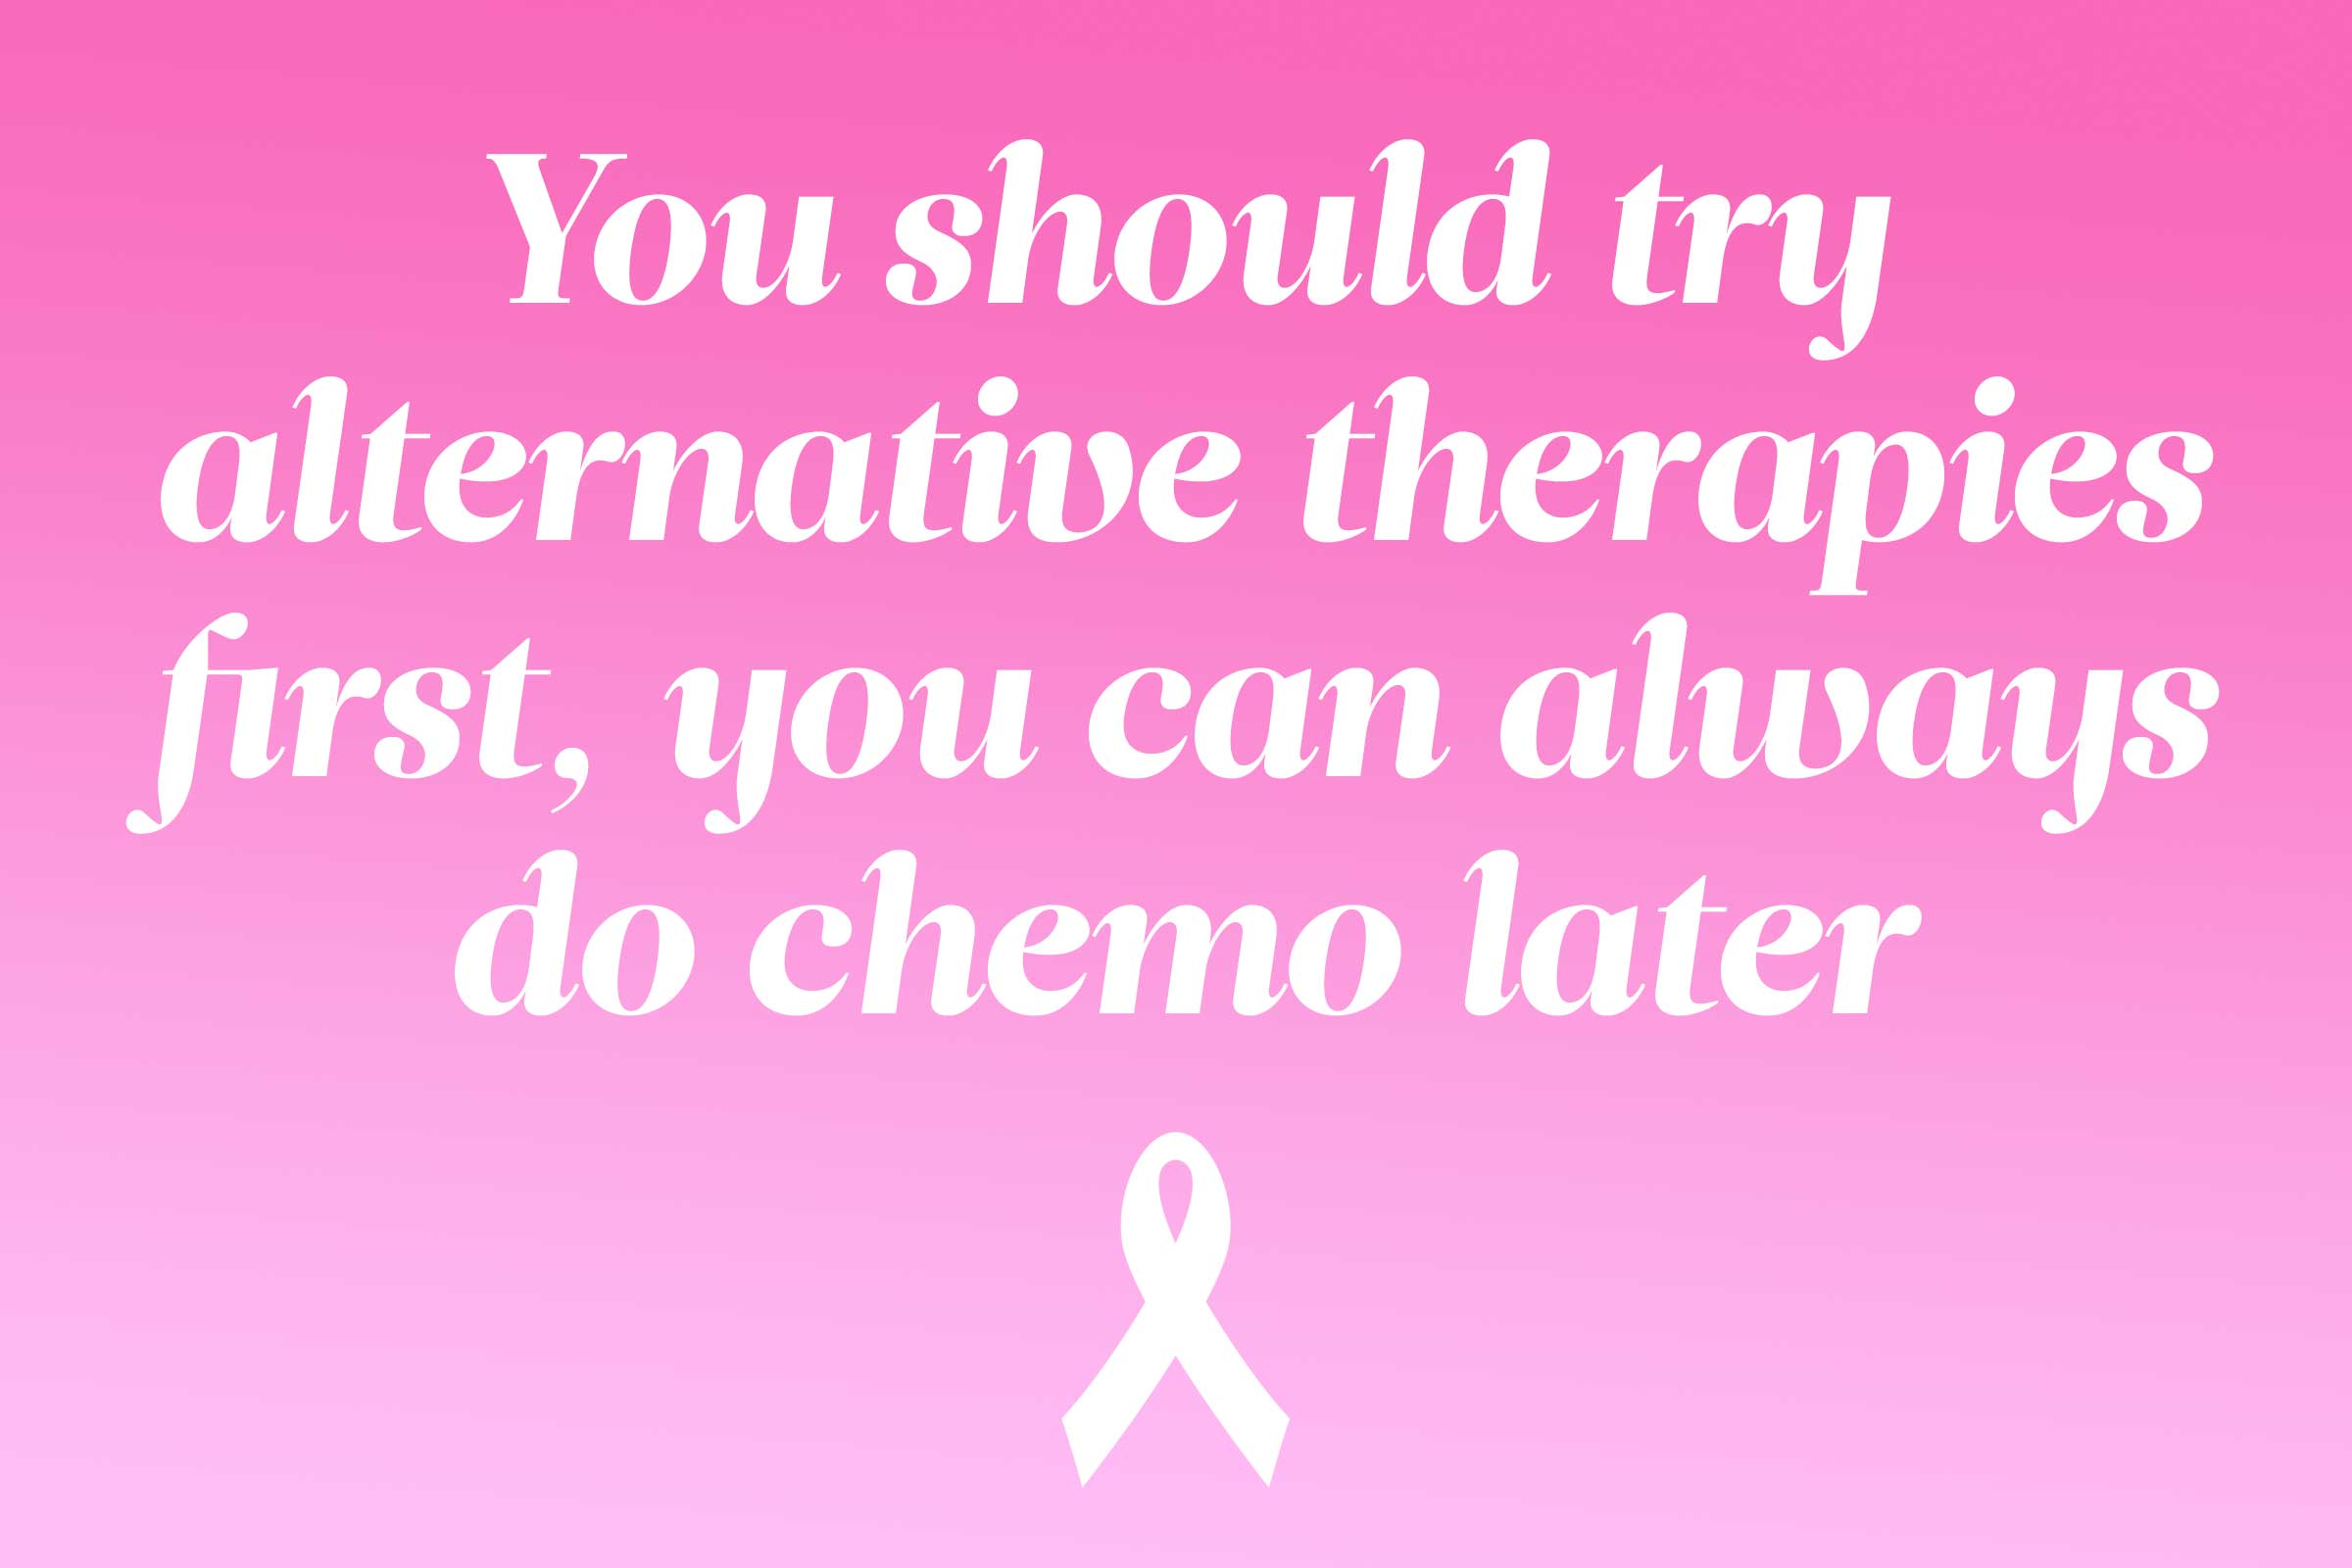 myth: try alternative therapies first, you can always do chemo later